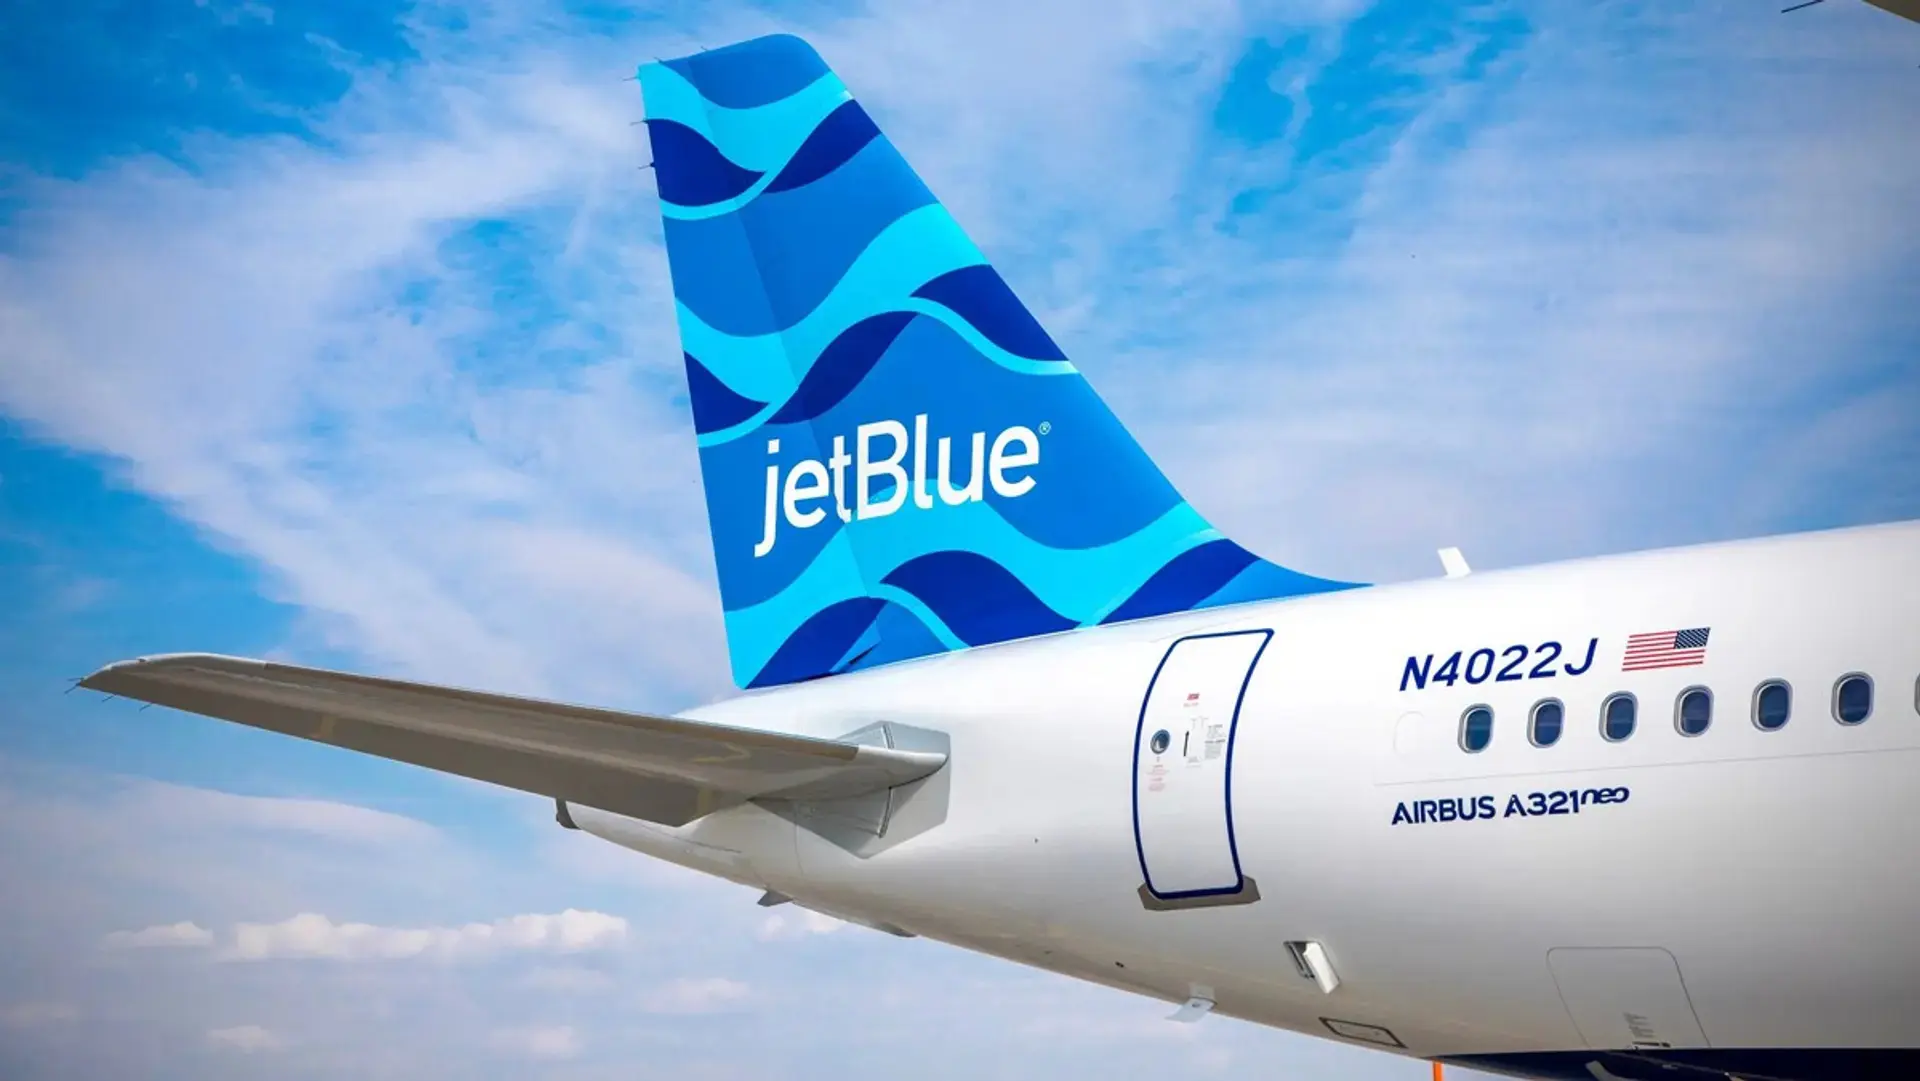 Airlines News - JetBlue is flying to Paris from Summer 2023